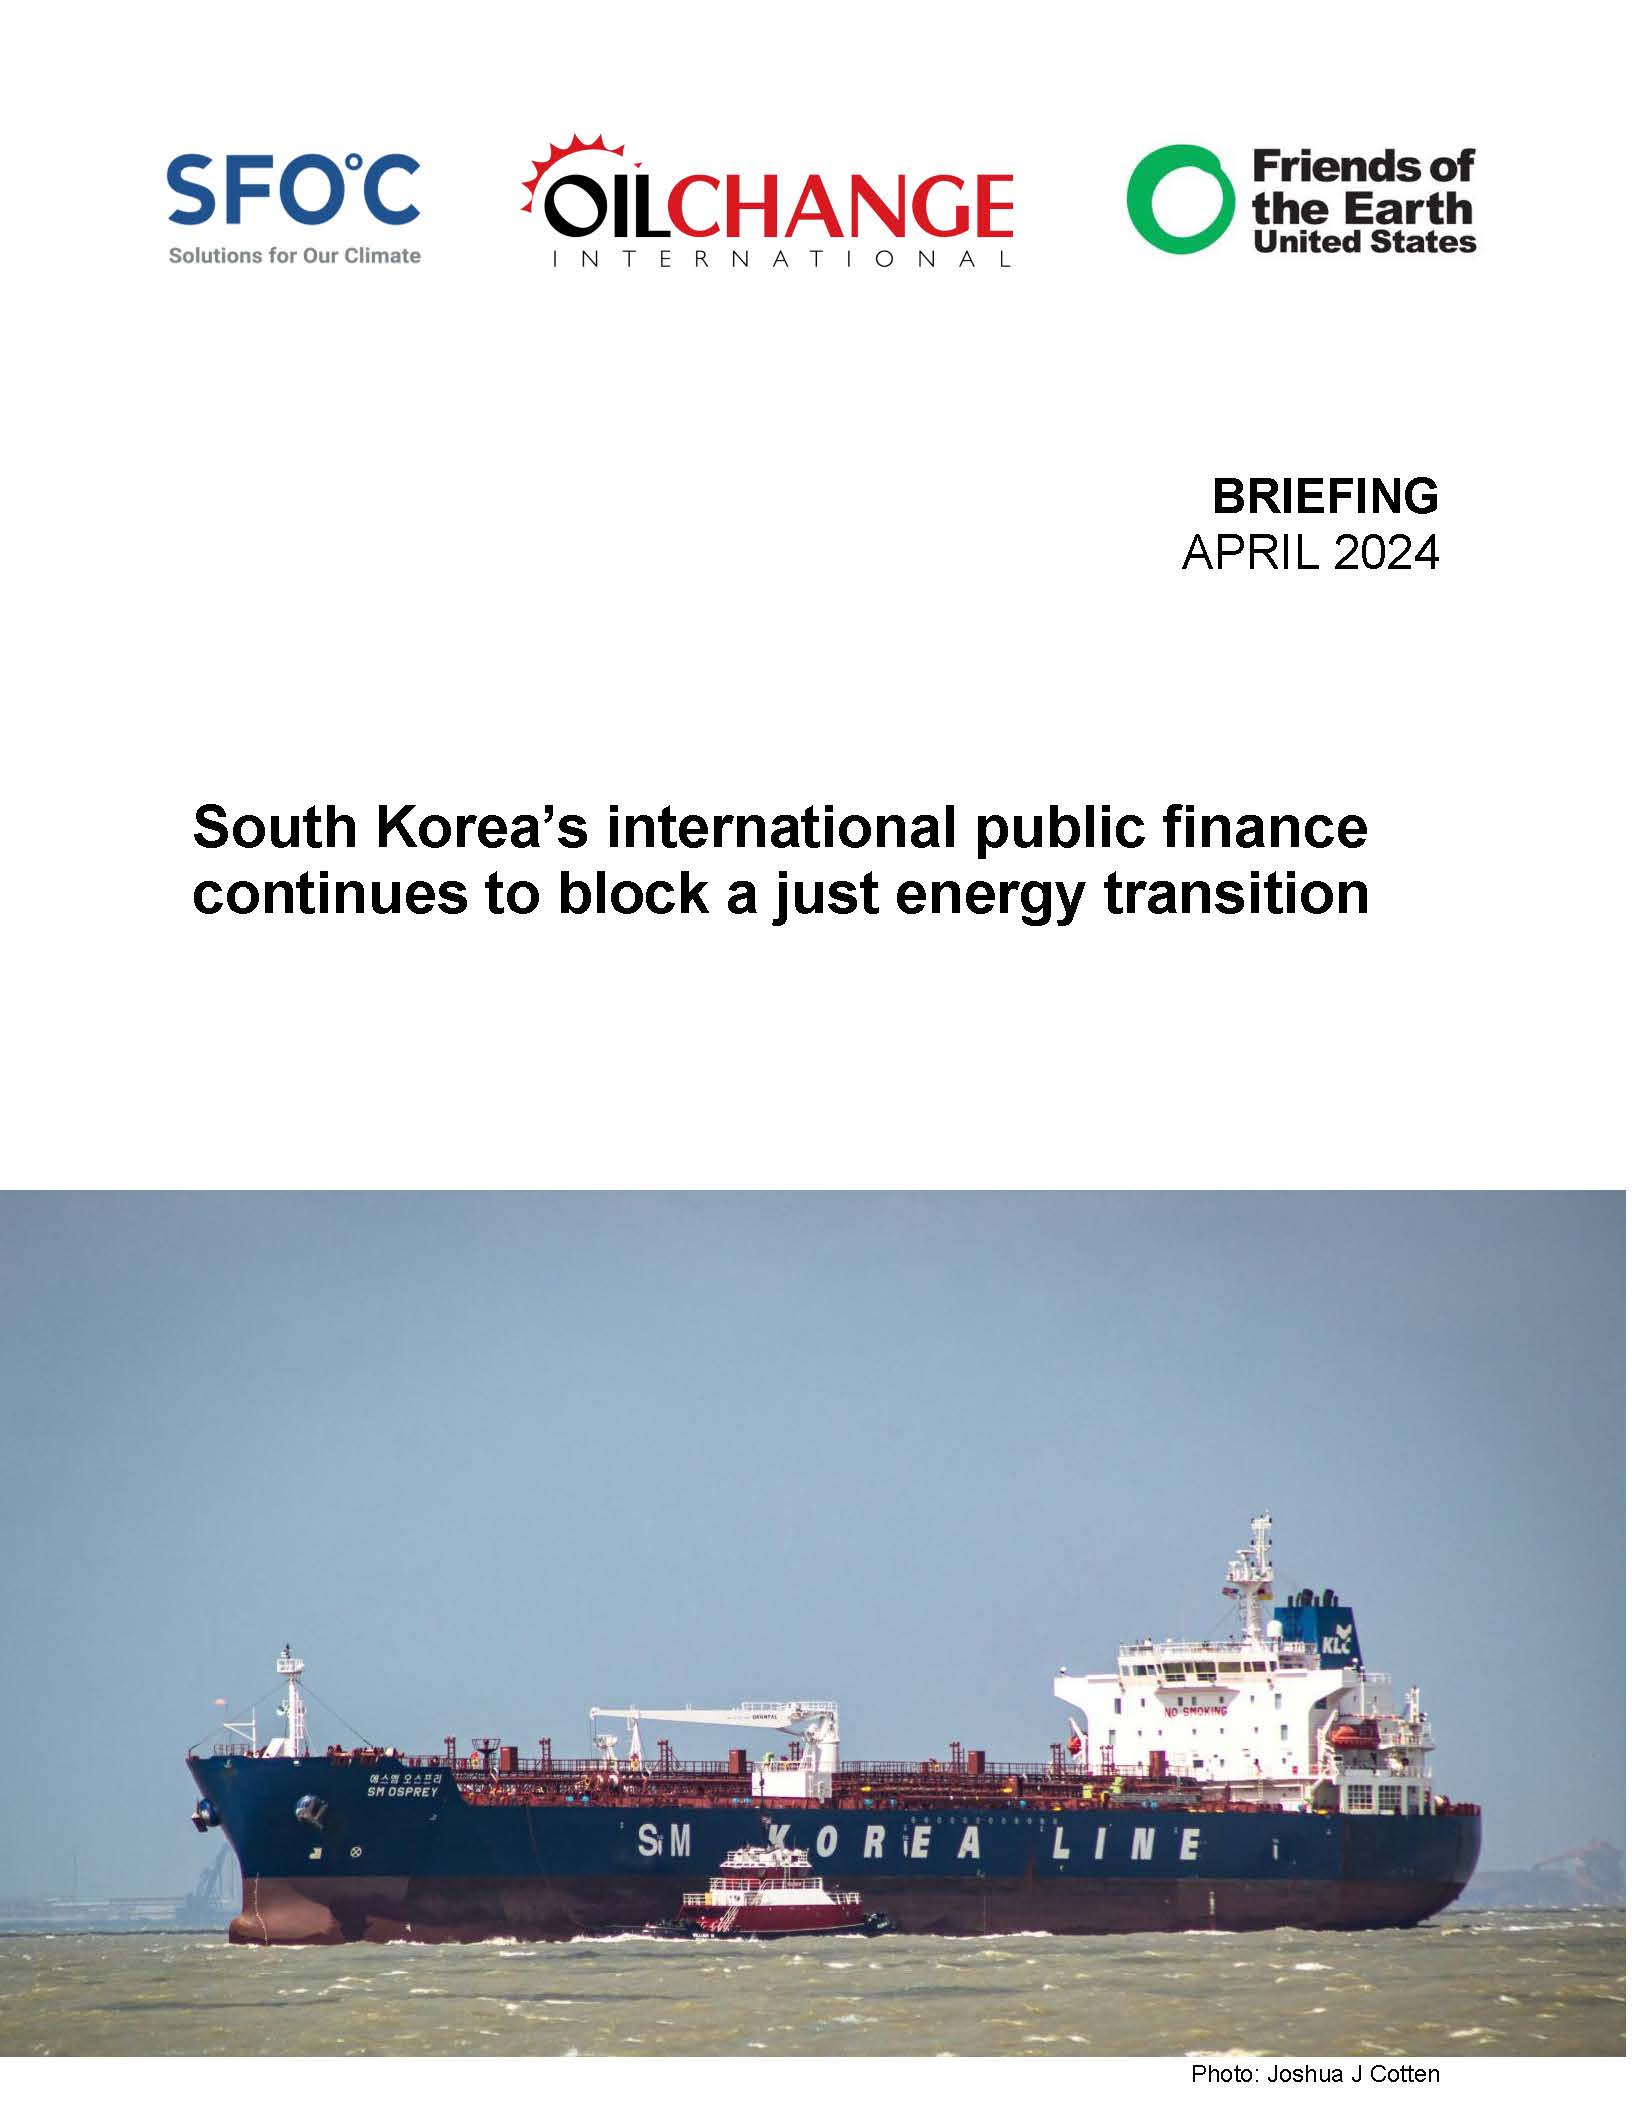 [Brief] South Korea’s international public finance continues to block a just energy transition